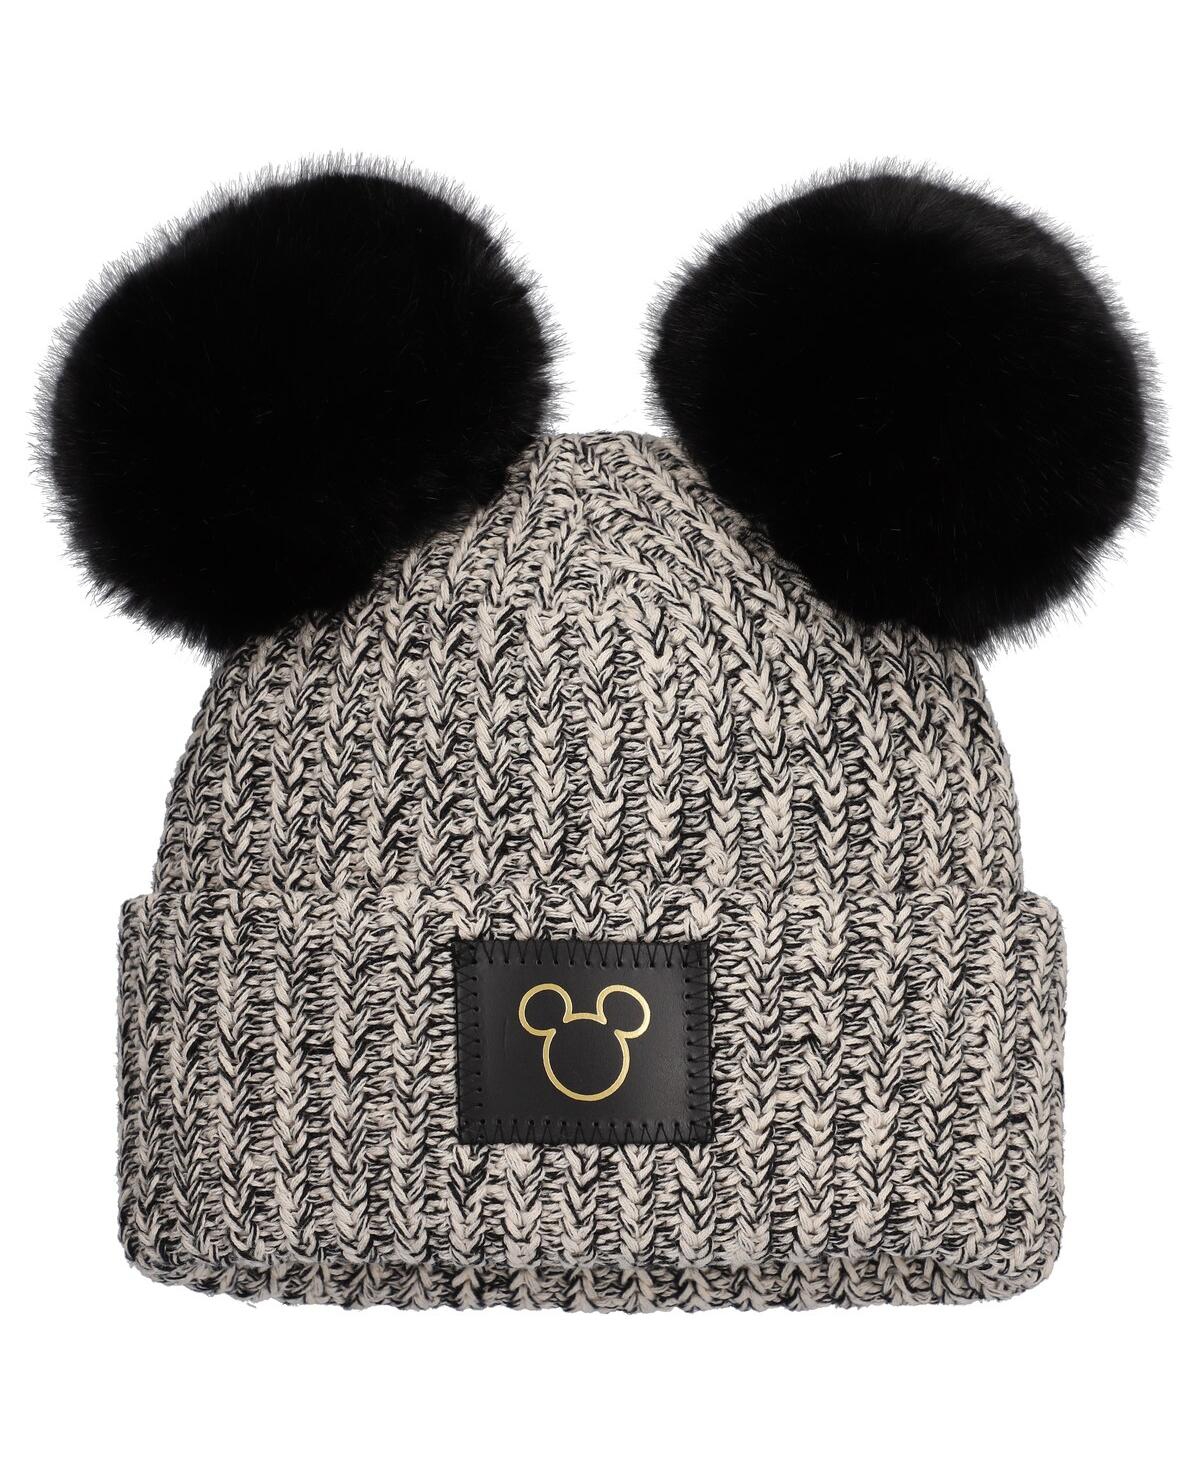 Women's Love Your Melon Mickey Mouse Black Outline Speckled Cuffed Knit Hat with Double Pom - Black